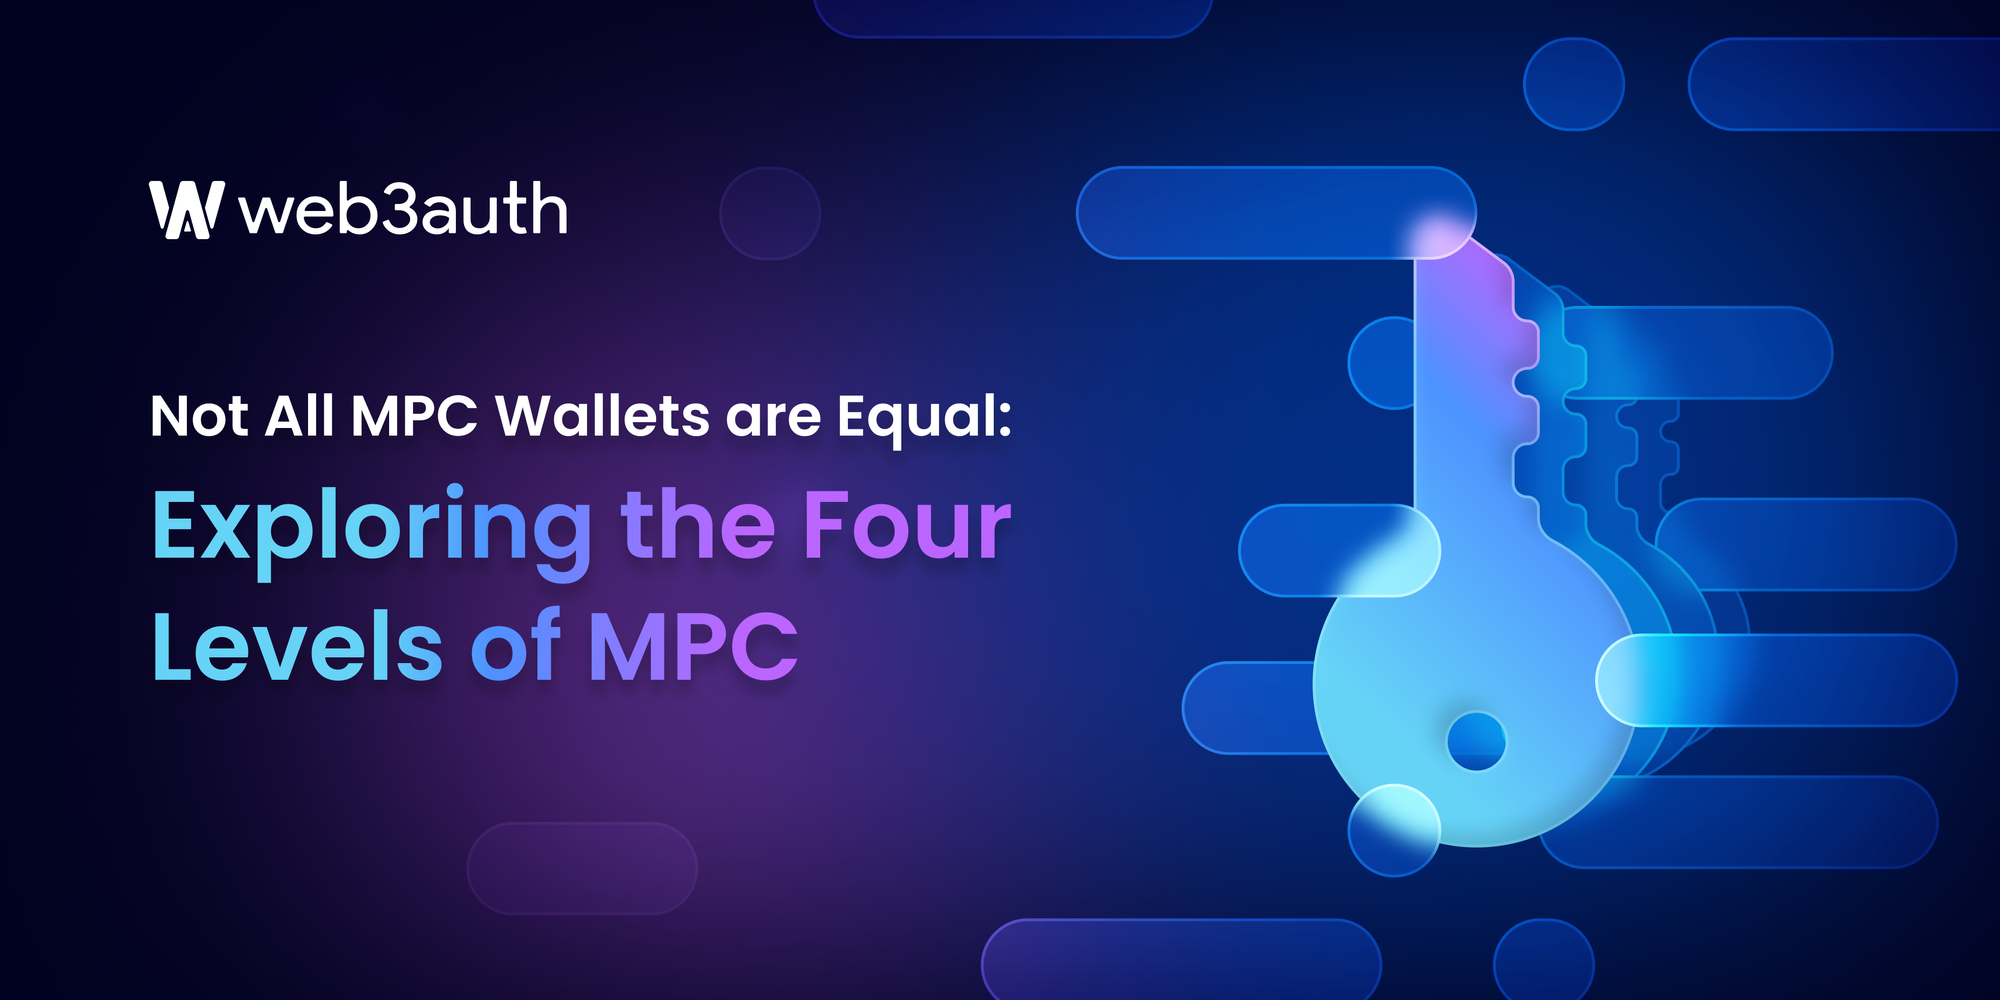 Not All MPC Wallets are Equal: Exploring the Four Levels of MPC